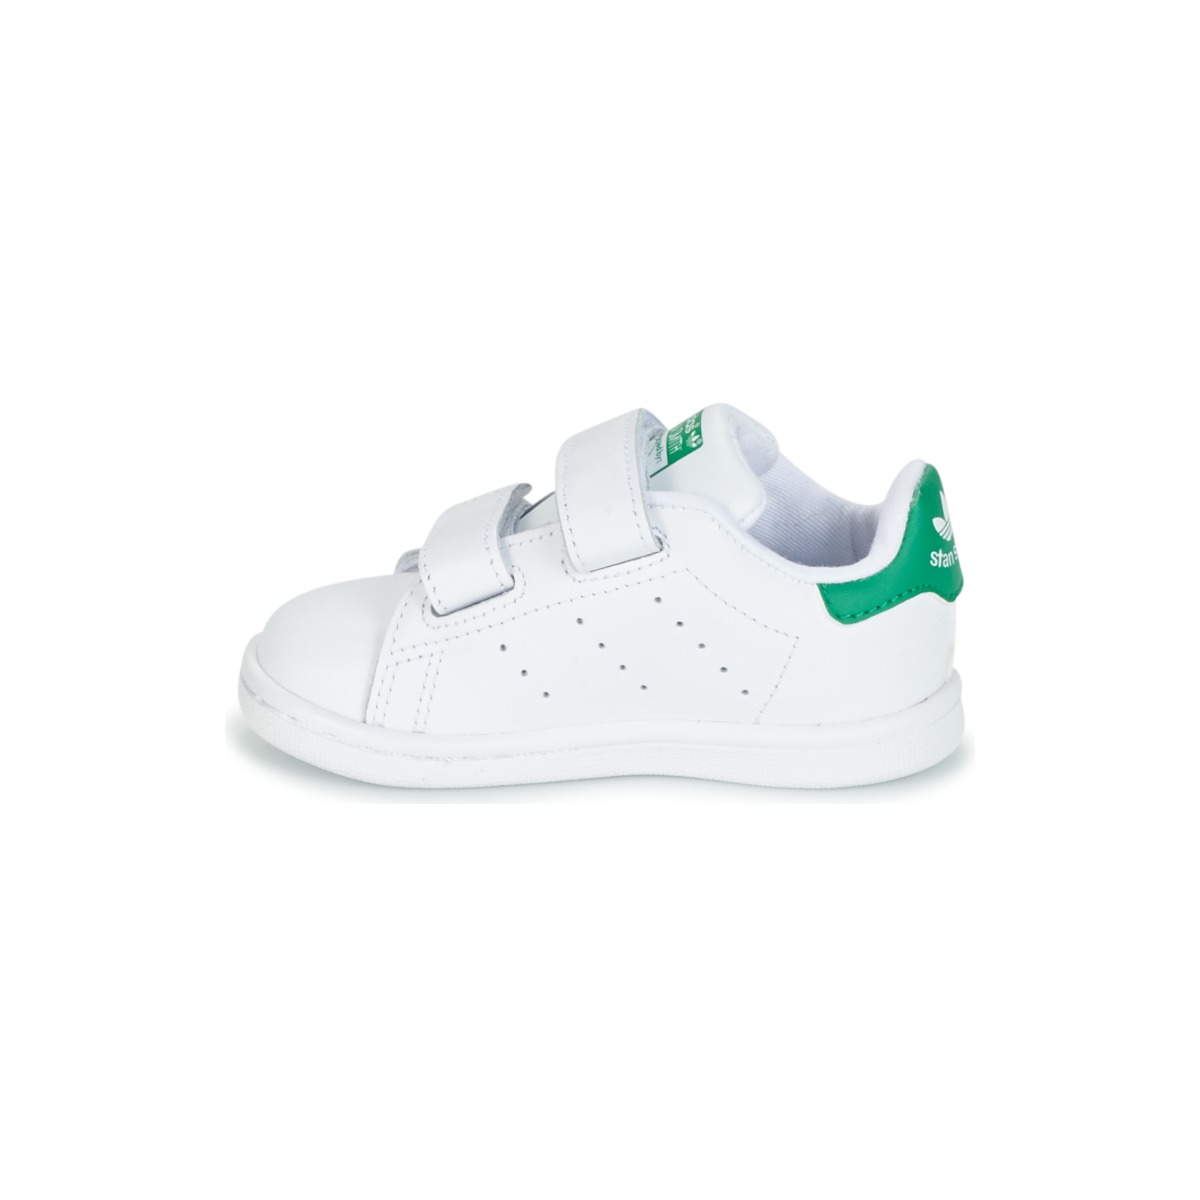 50%OFF adidas Originals STAN SMITH CF I White Green Shoes Low top trainers  Child